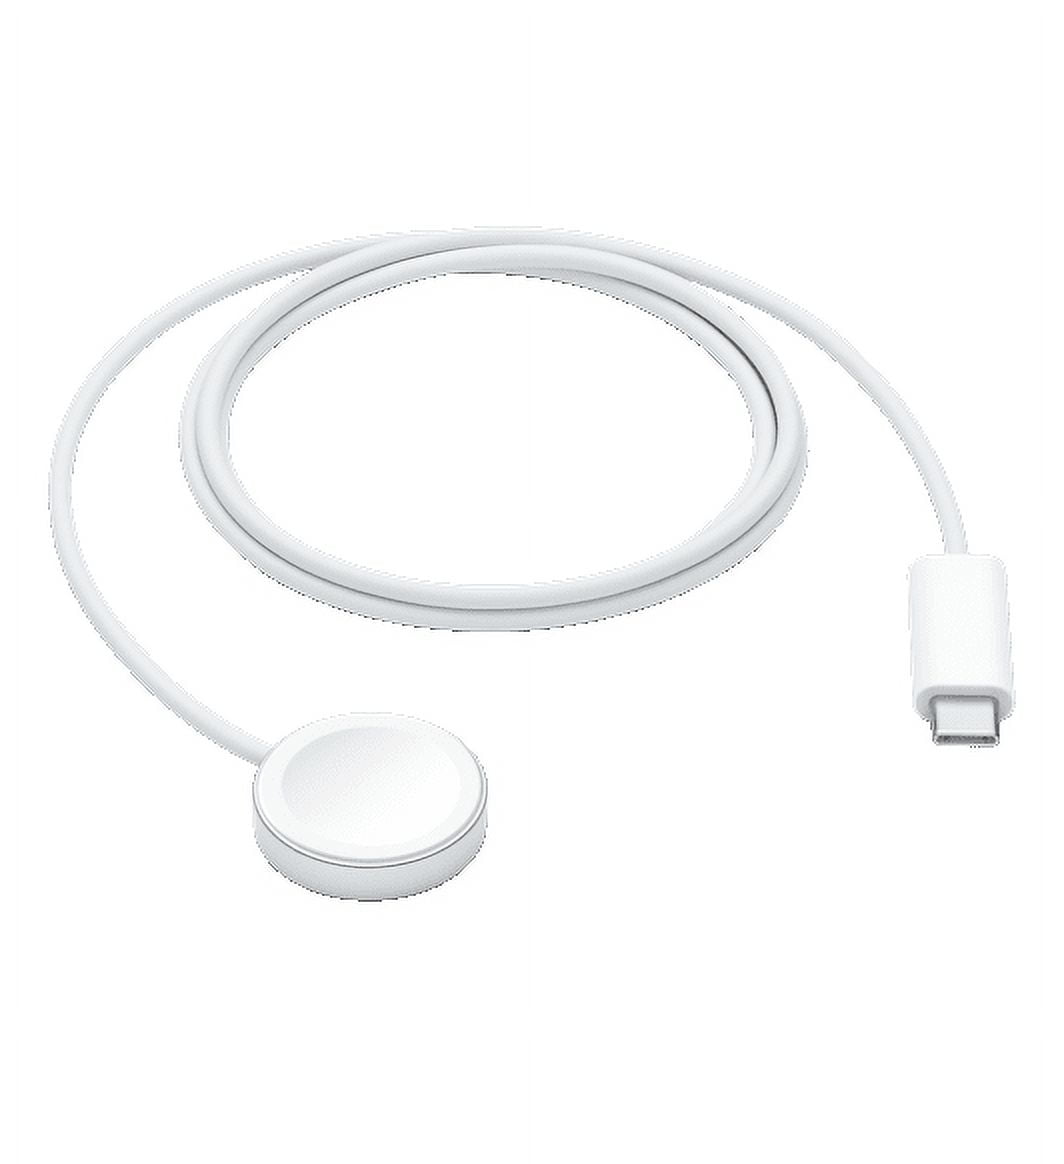 USB Cable Bracelet for Apple Phone